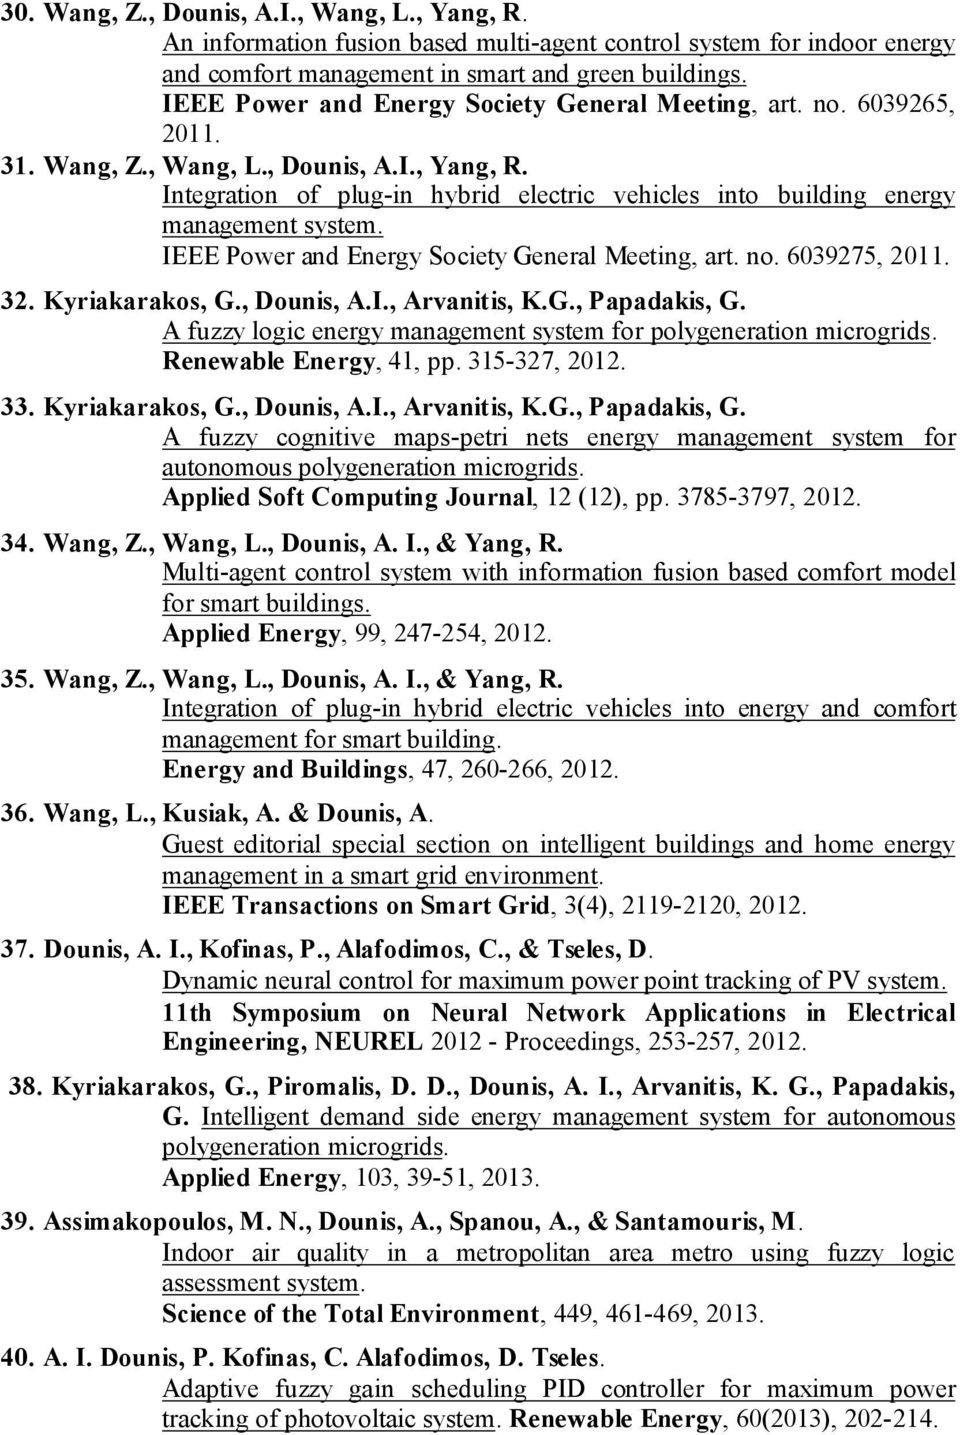 Integration of plug-in hybrid electric vehicles into building energy management system. IEEE Power and Energy Society General Meeting, art. no. 6039275, 2011. 32. Kyriakarakos, G., Dounis, A.I., Arvanitis, K.